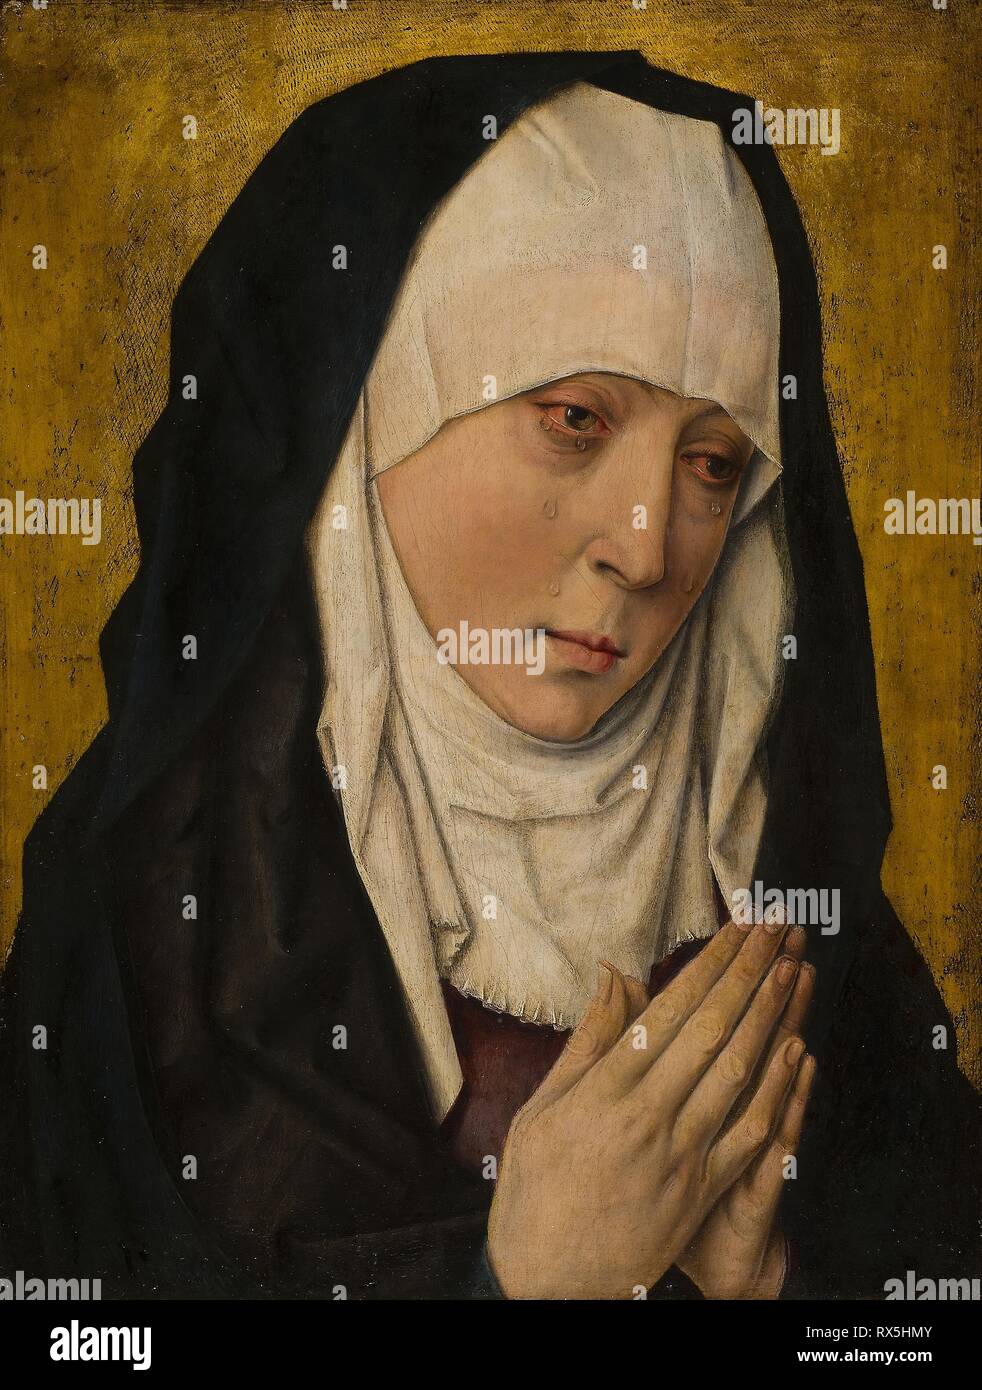 Mater Dolorosa (Sorrowing Virgin). Workshop of Dieric Bouts; Netherlandish, c. 1410-1475. Date: 1480-1500. Dimensions: 38.7 × 30.3 cm (15 1/4 × 11 7/8 in.); painted surface: 37.2 × 29 cm (14 7/8 × 11 3/8 in.). Oil on panel. Origin: Netherlands. Museum: The Chicago Art Institute. Stock Photo